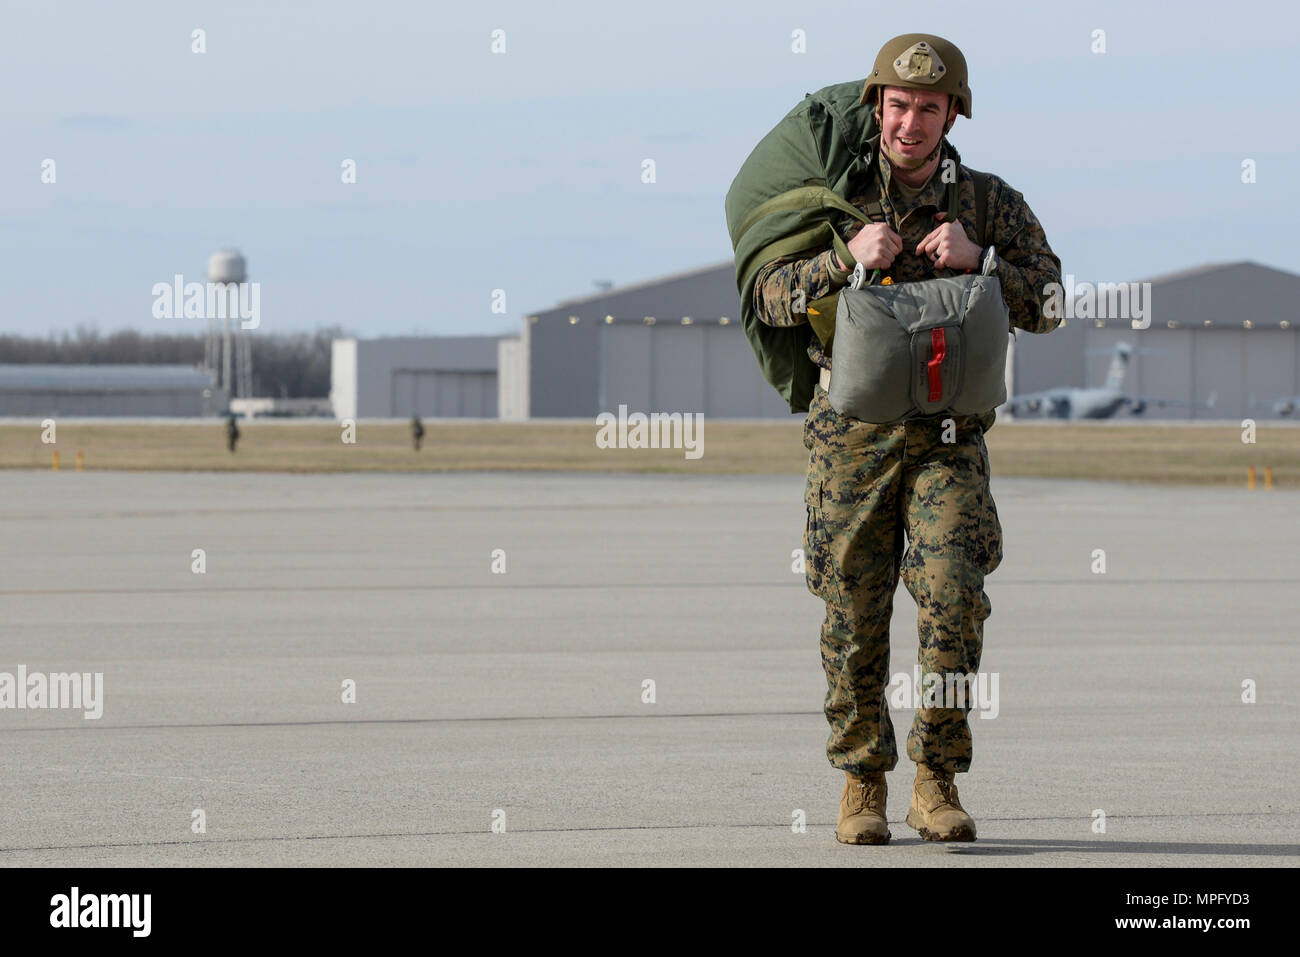 Marine Capt. Richard Spicer, a firepower control team leader with the 4th Air Naval Gunfire Liaison Company, West Palm Beach, Fla., returns from the drop zone after a successful jump at Wright-Patterson Air Force Base, Ohio, March 11, 2017. Members of the 88th Operations Support Squadron, 88th Security Forces Squadron, 788th Civil Engineer Squadron, and 88th Medical Operations Squadron provided support to the paratroop operations. (U.S. Air Force photo by Wesley Farnsworth / Released) Stock Photo